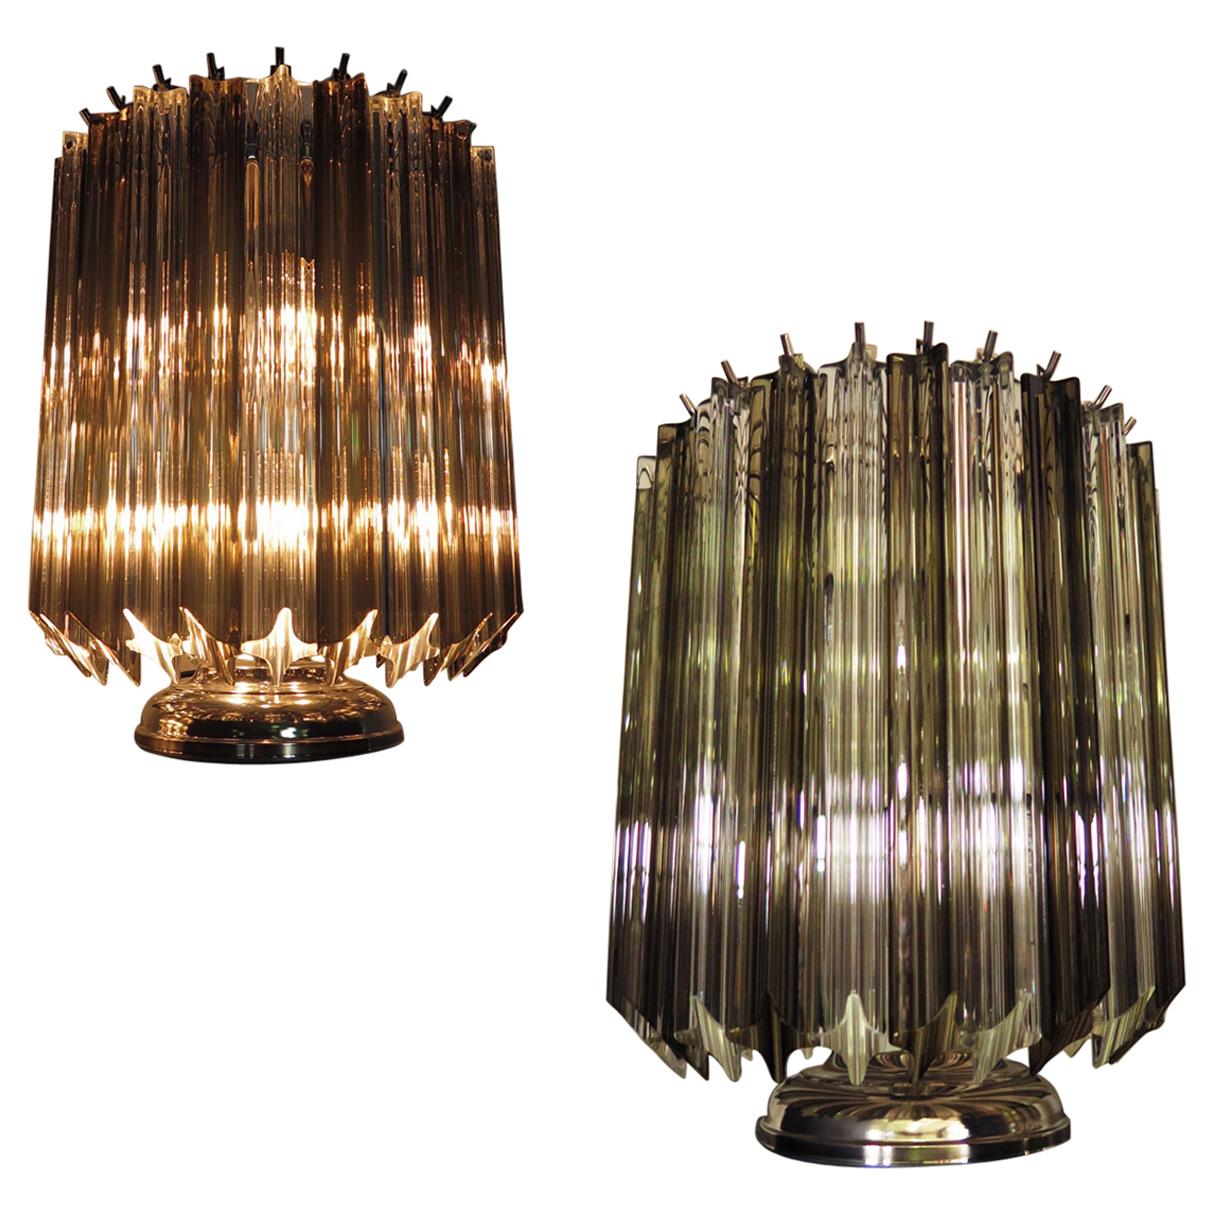 Pair of Table Lamps, 24 Transparent and Smoked Quadriedri, Murano, 1990s